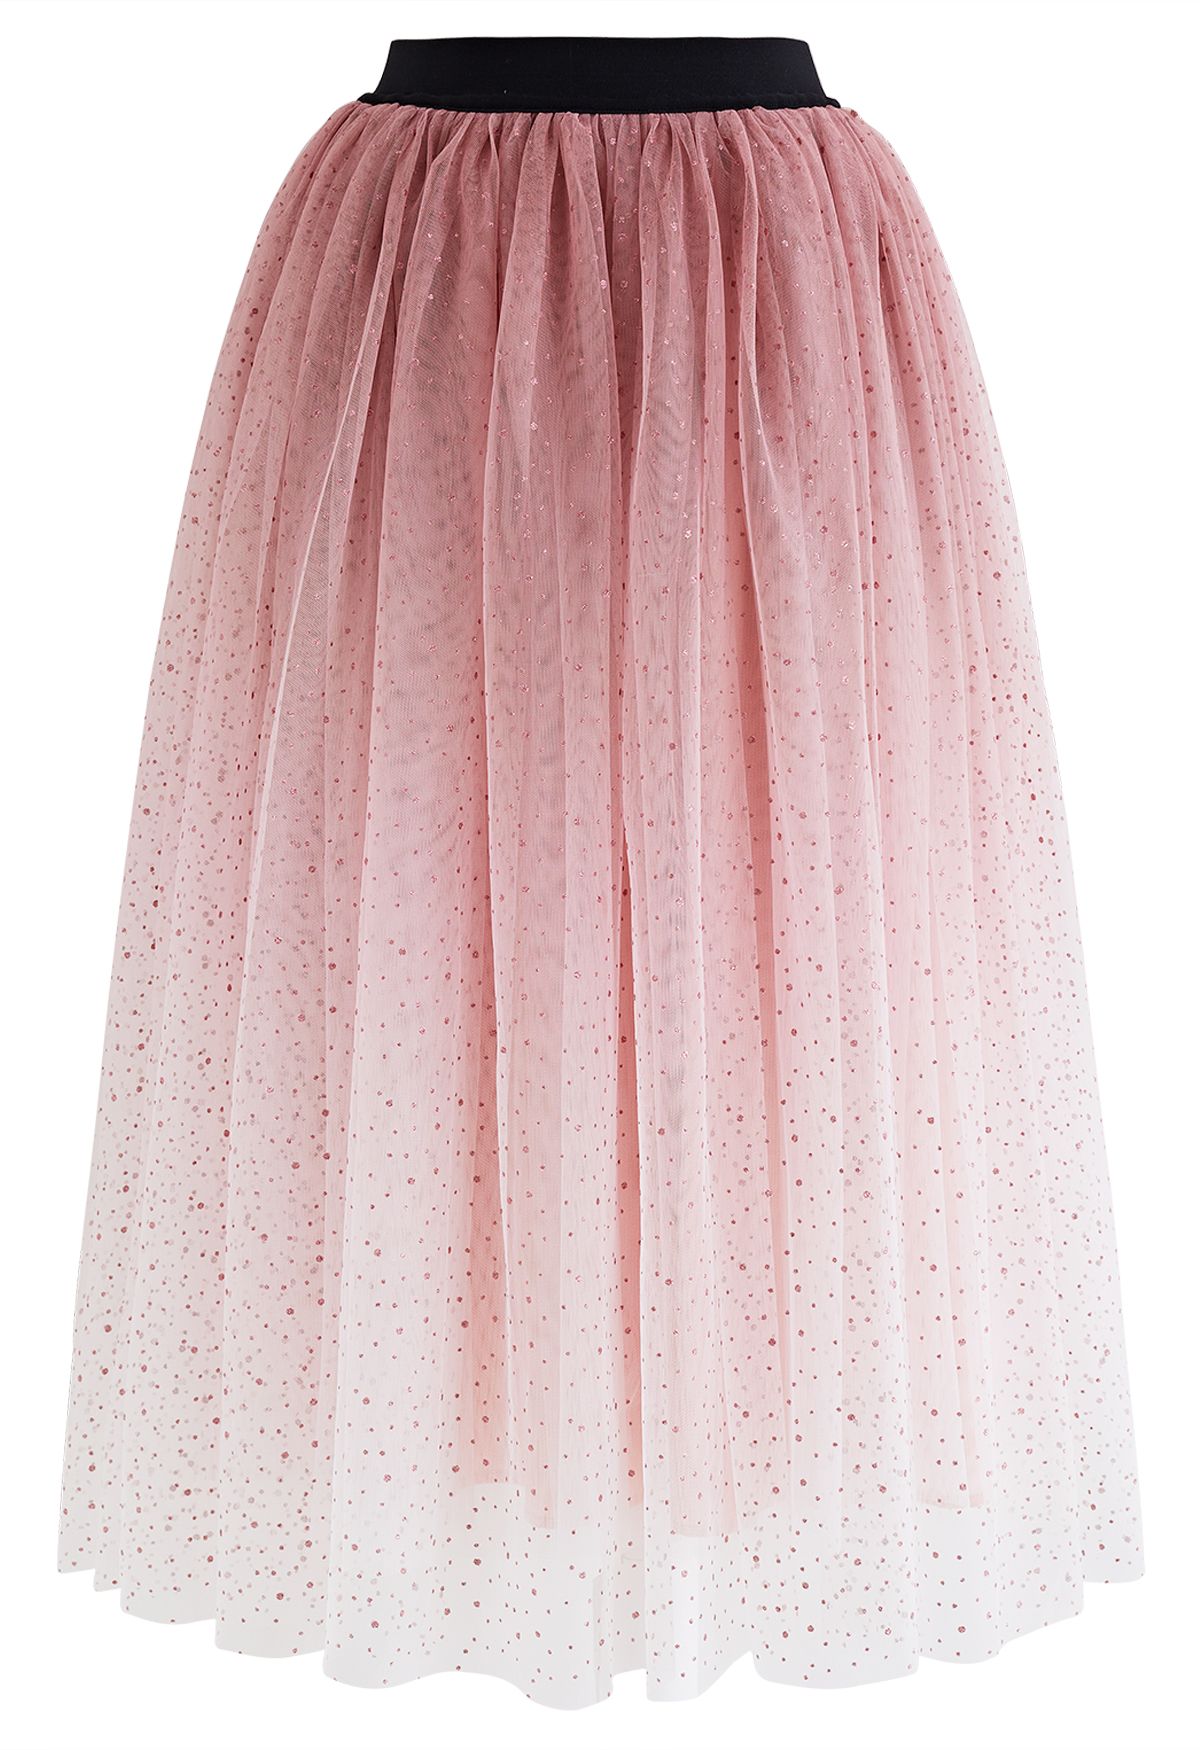 Festive Sparkle Ombre Tulle Midi Skirt in Pink - Retro, Indie and ...